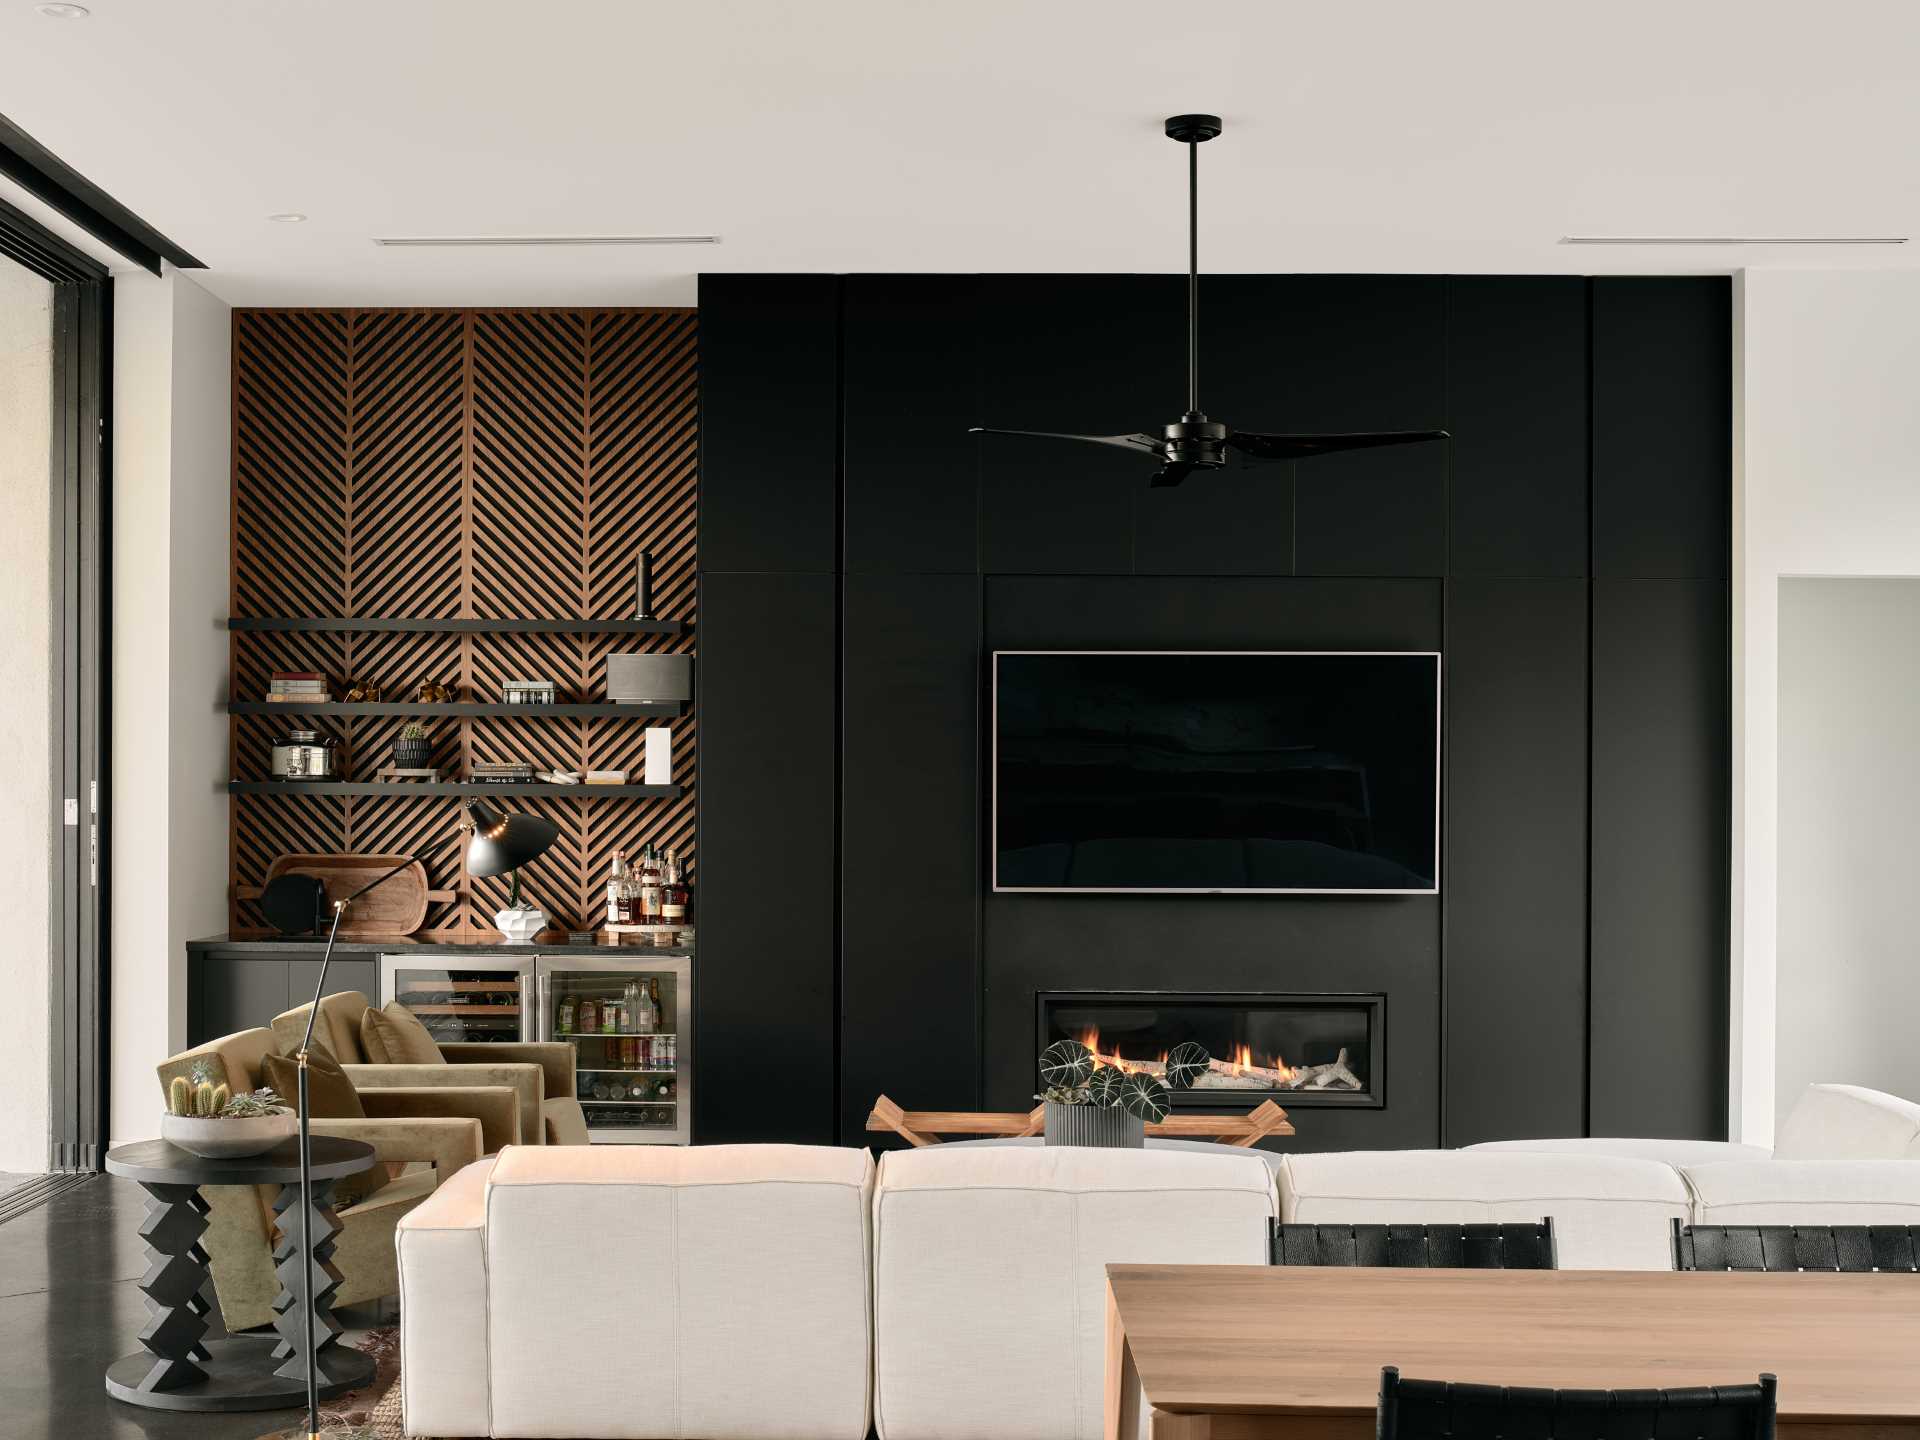 This modern living room with a black accent wall.